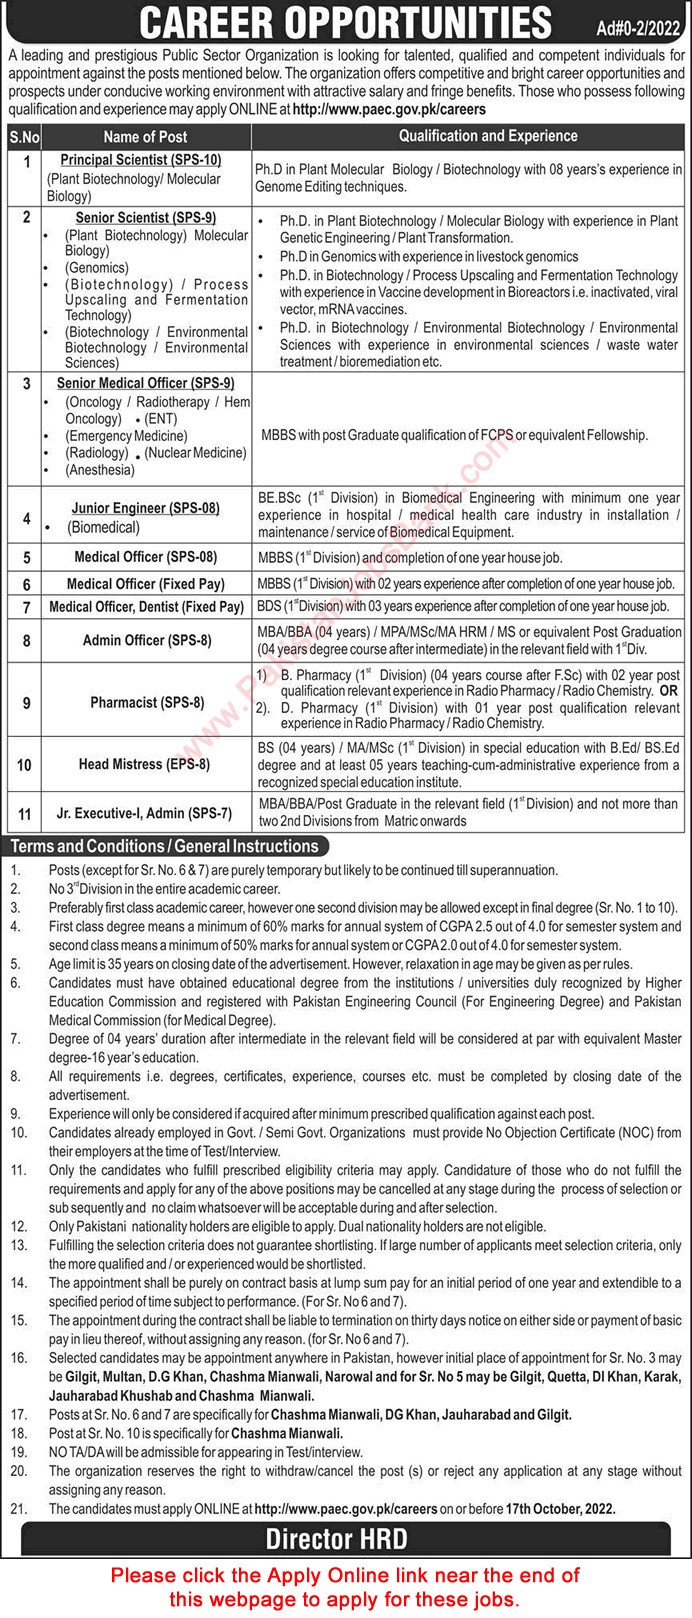 PAEC Jobs October 2022 Apply Online Medical Officers, Scientists & Others Latest